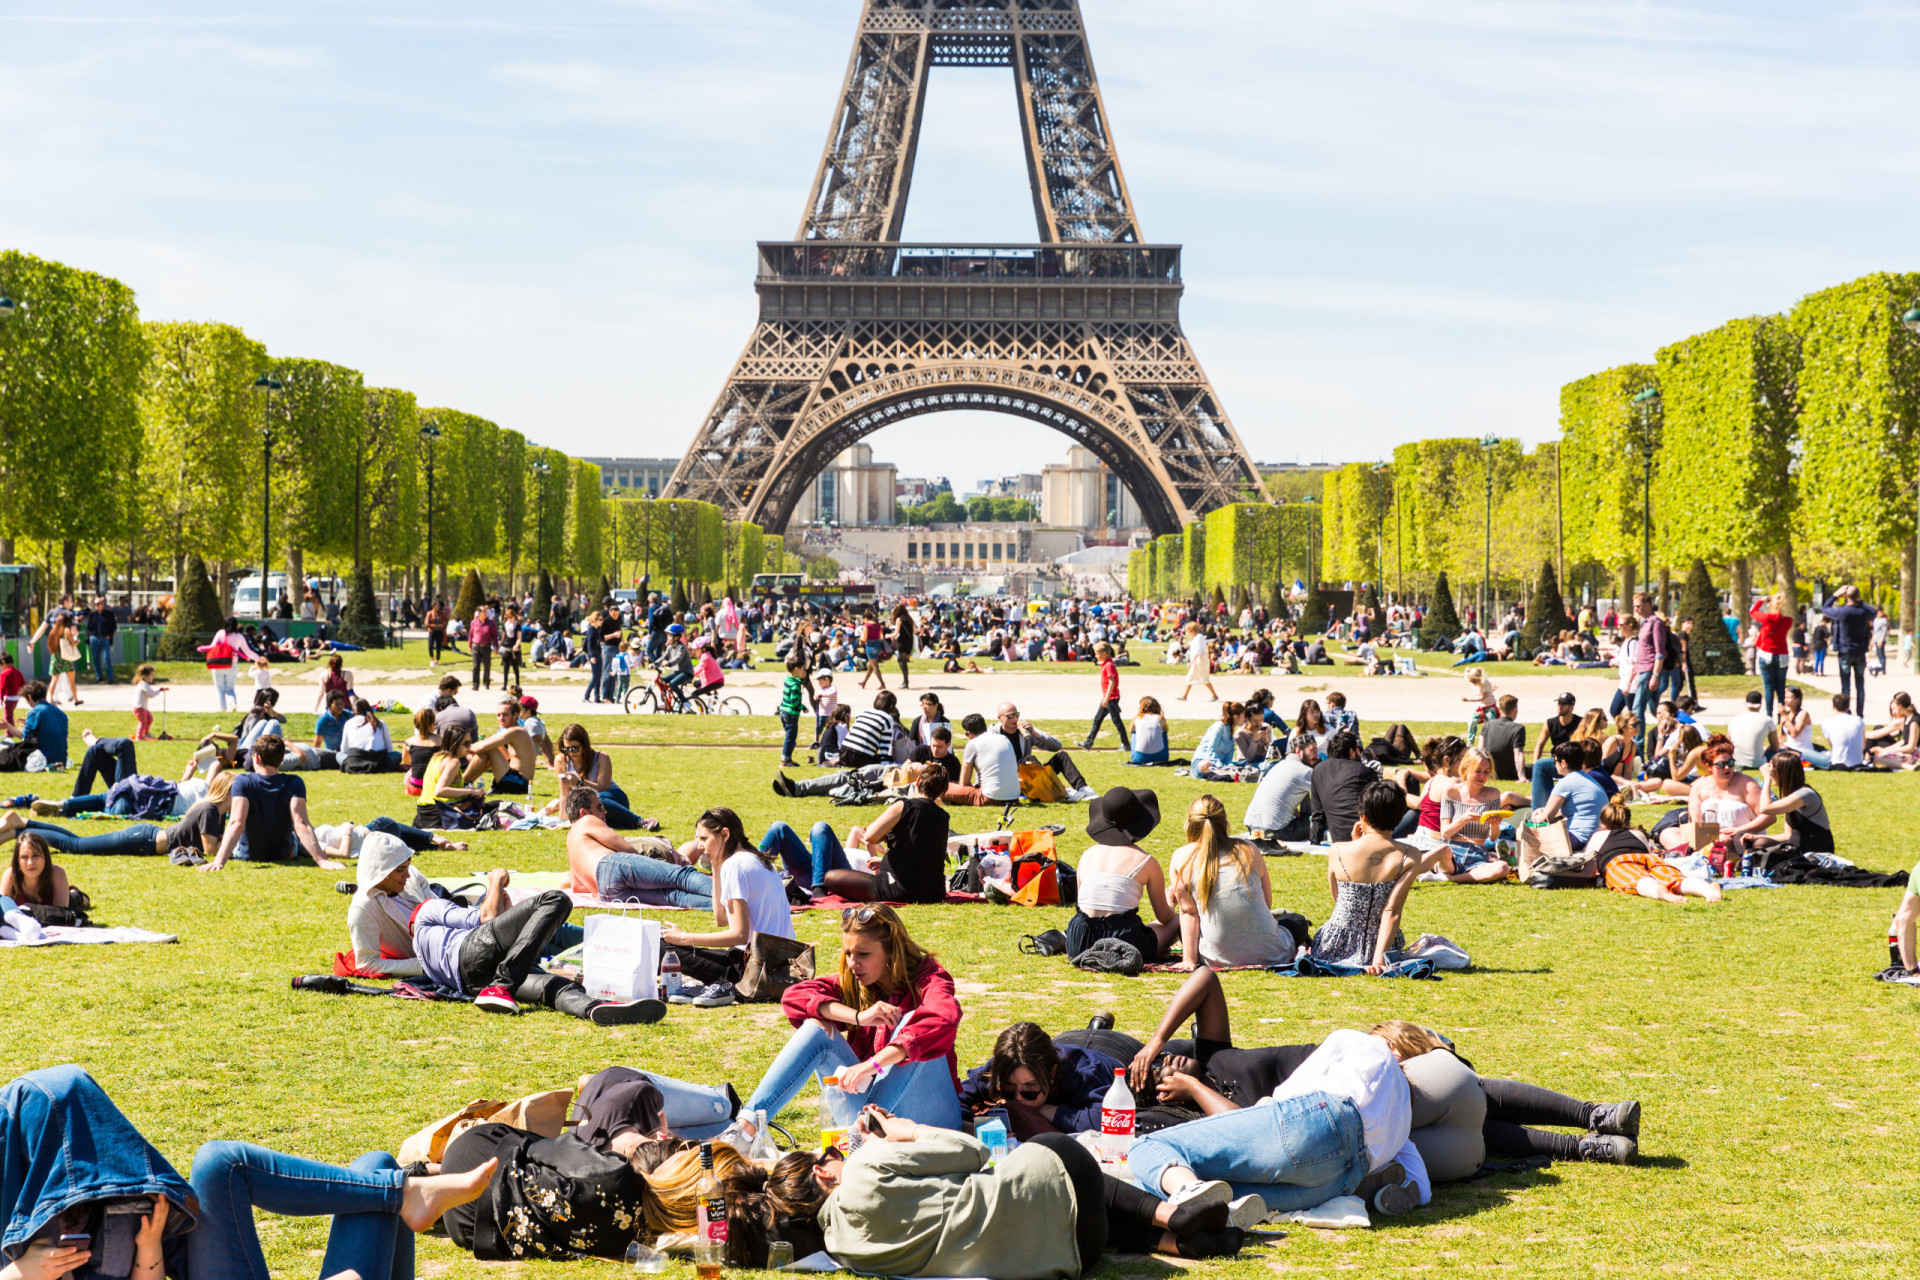 <p>If you're there during the warmer months, you'll likely find a bunch of people laying on the grass. Instead of getting annoyed by it, join the crowd!</p><p>You may also like:<a href="https://www.starsinsider.com/n/256255?utm_source=msn.com&utm_medium=display&utm_campaign=referral_description&utm_content=524572en-us"> The life and times of HRH Prince Philip Duke of Edinburgh</a></p>